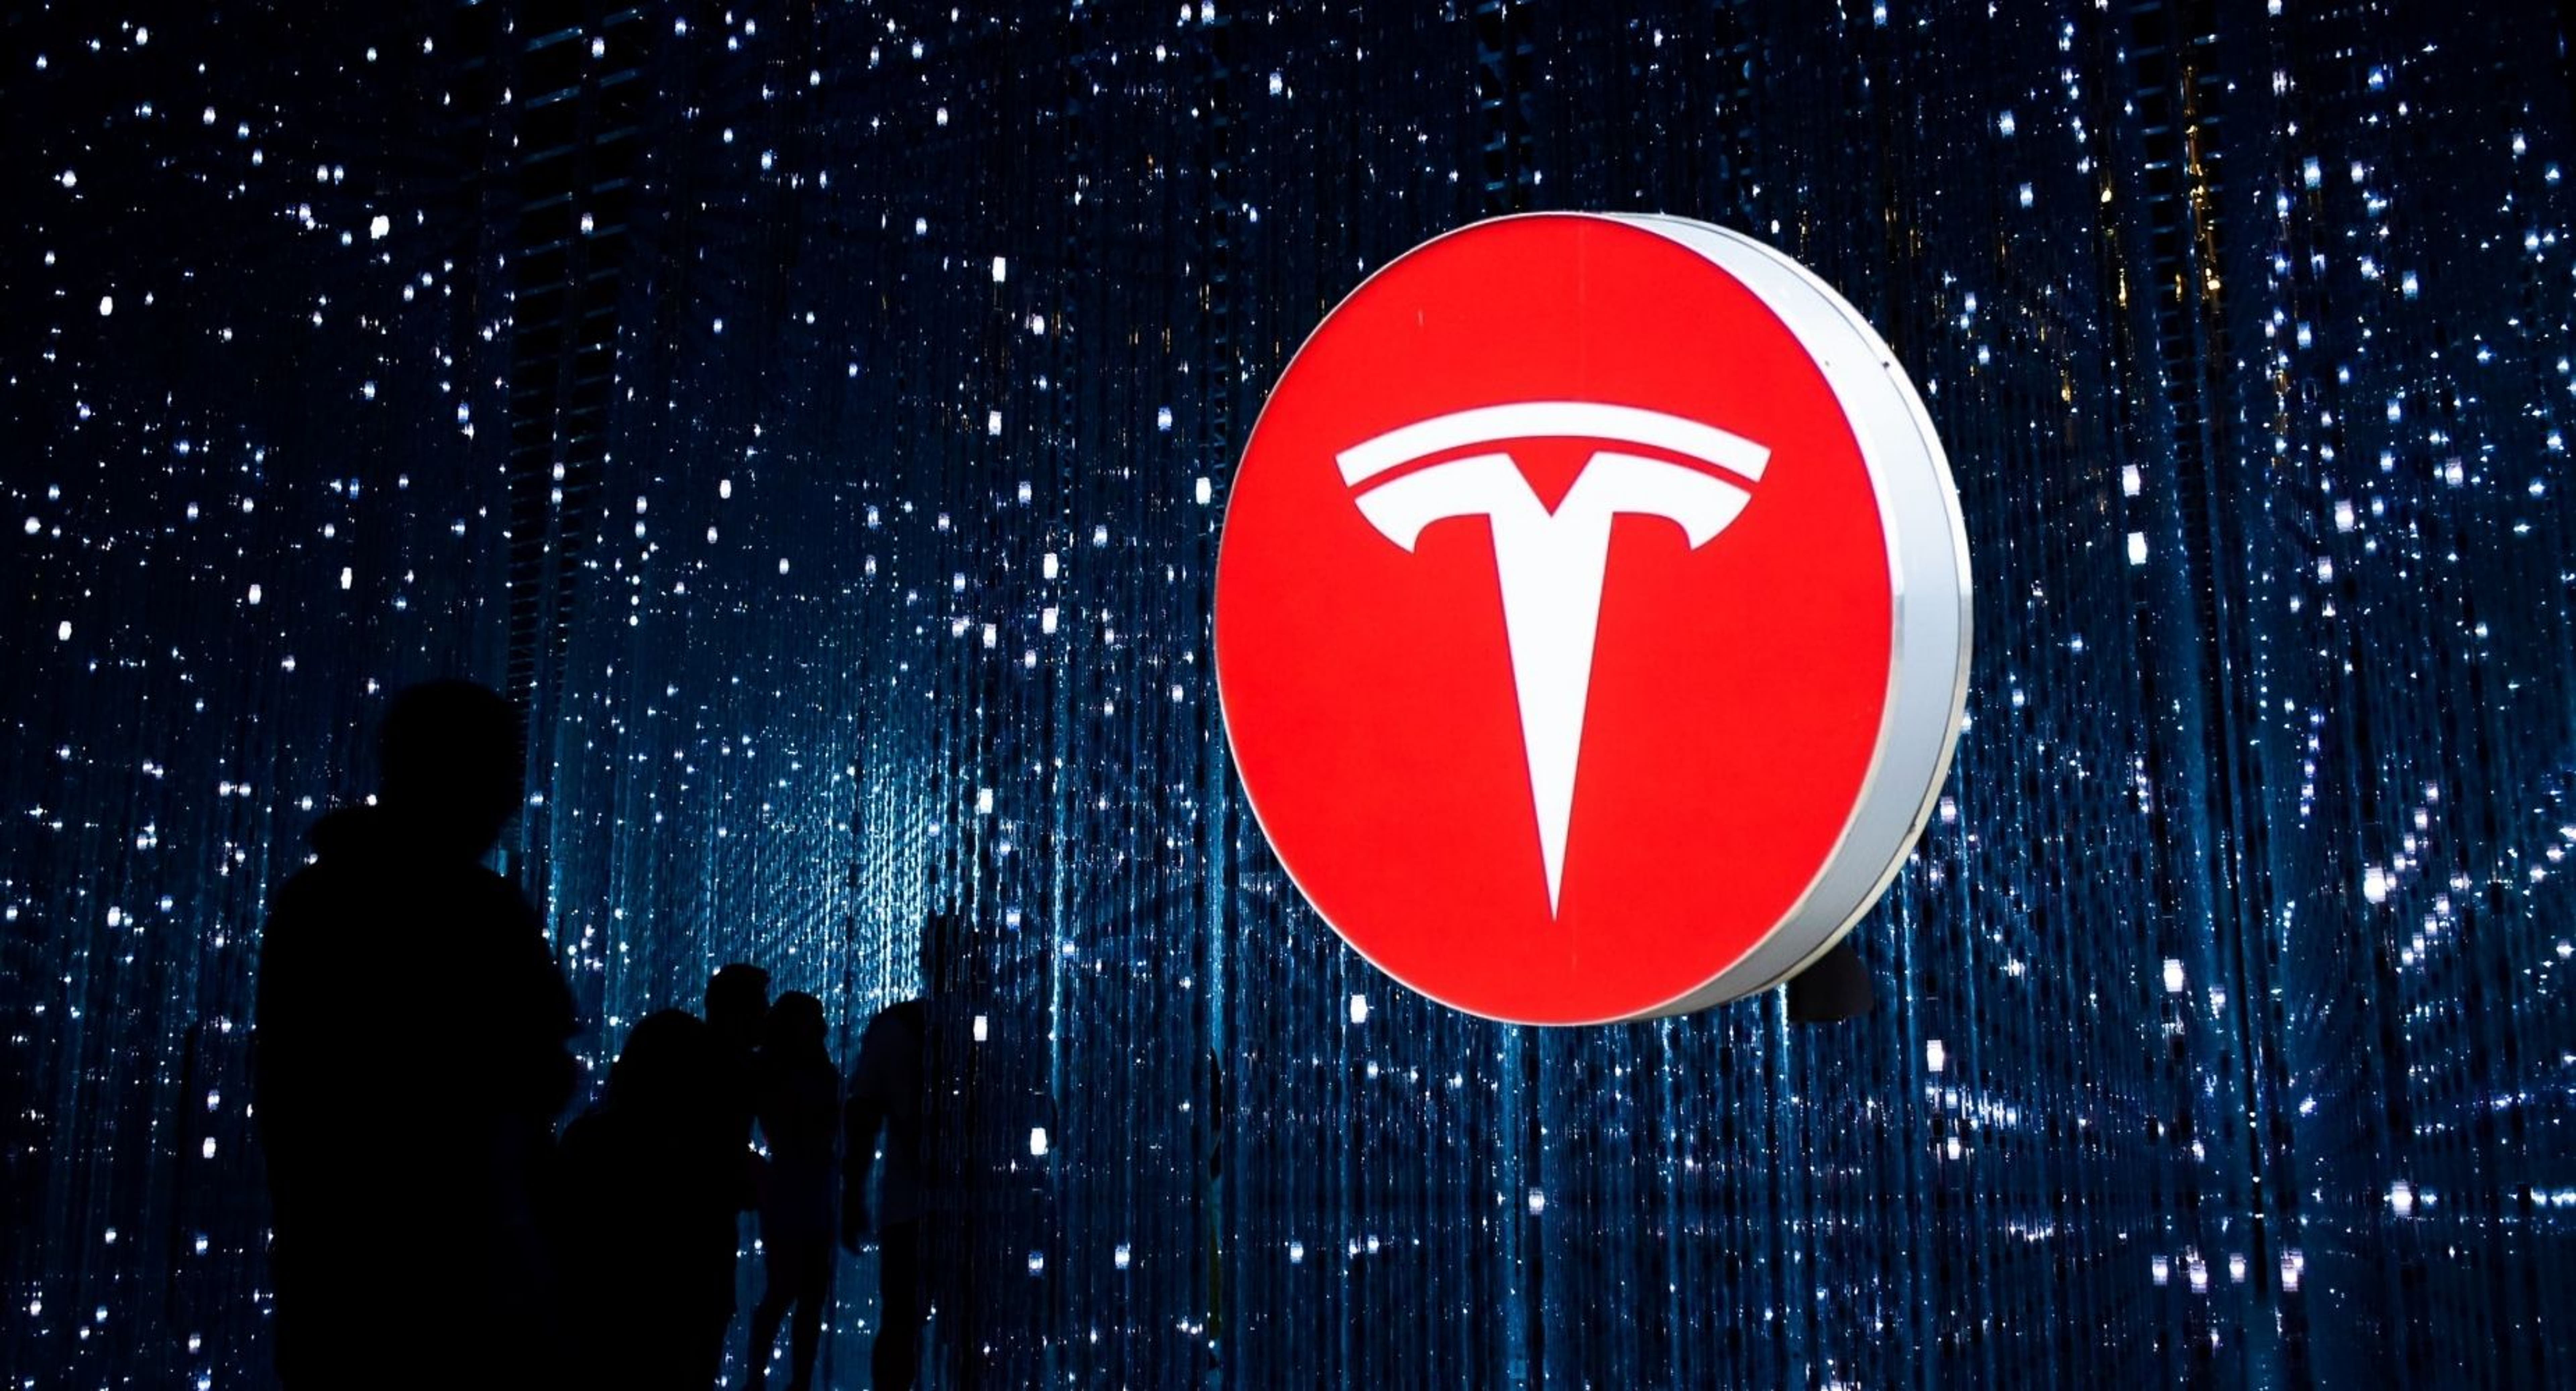 Where Will Tesla Stock Be In 2030? Analyst Weighs In